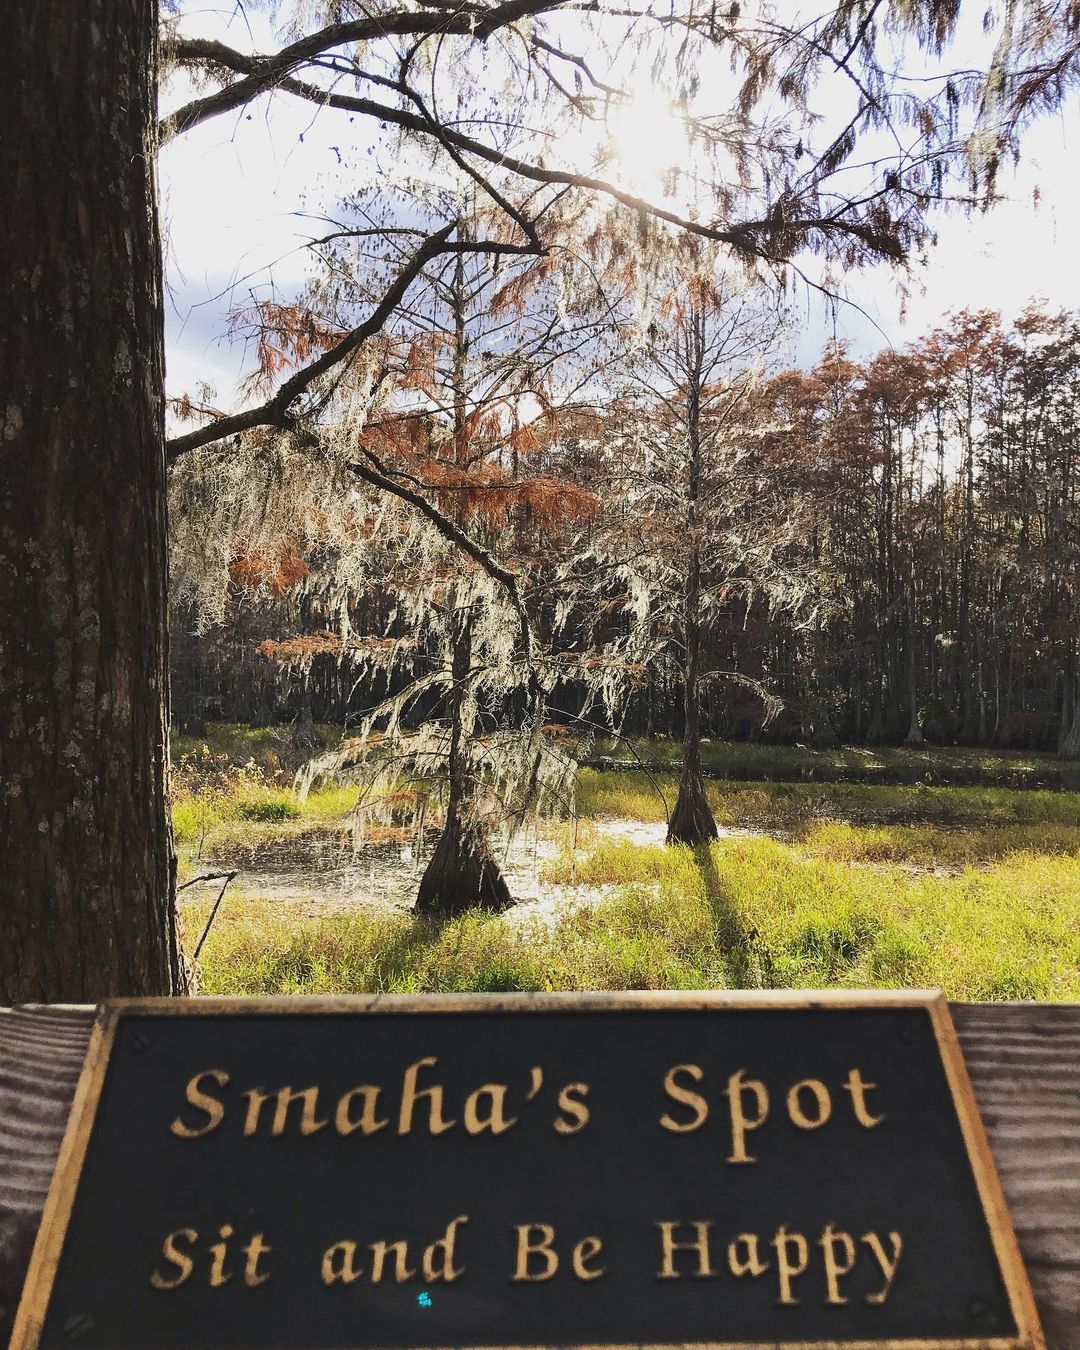 “Sit and be happy” at the Tallahassee Museum this week 🤩

📸: @bretsw

#TallahasseeMuseum #Tallahassee #iHeartTally #TheArtsLiveHere #ExploreFlorida #LoveFL #Museum #FamilyVacation